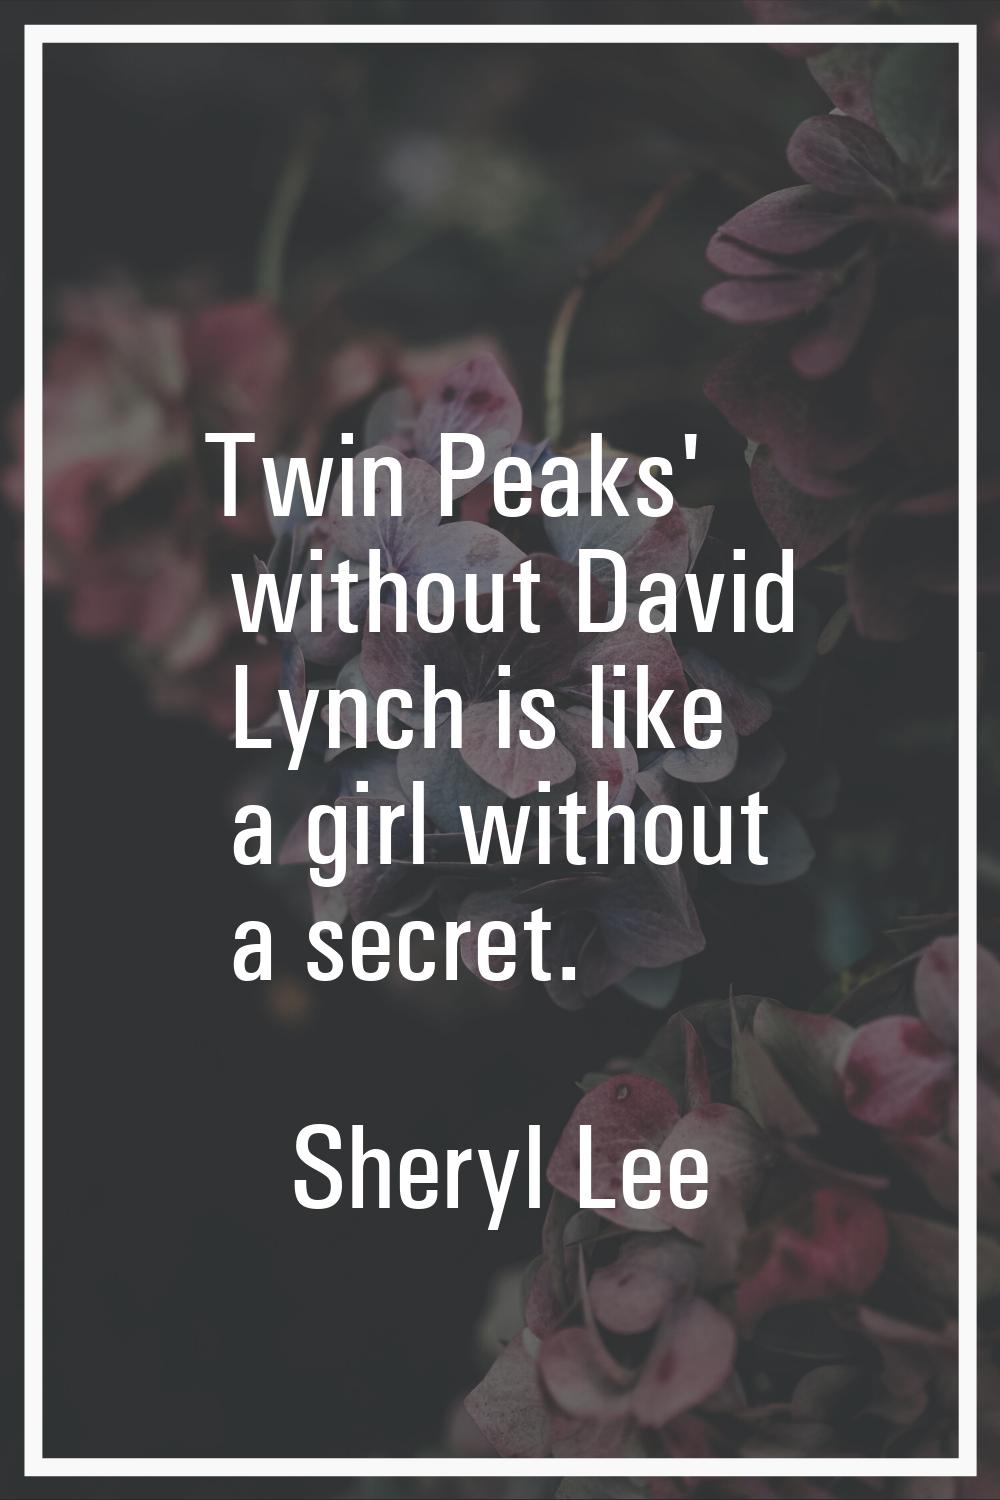 Twin Peaks' without David Lynch is like a girl without a secret.